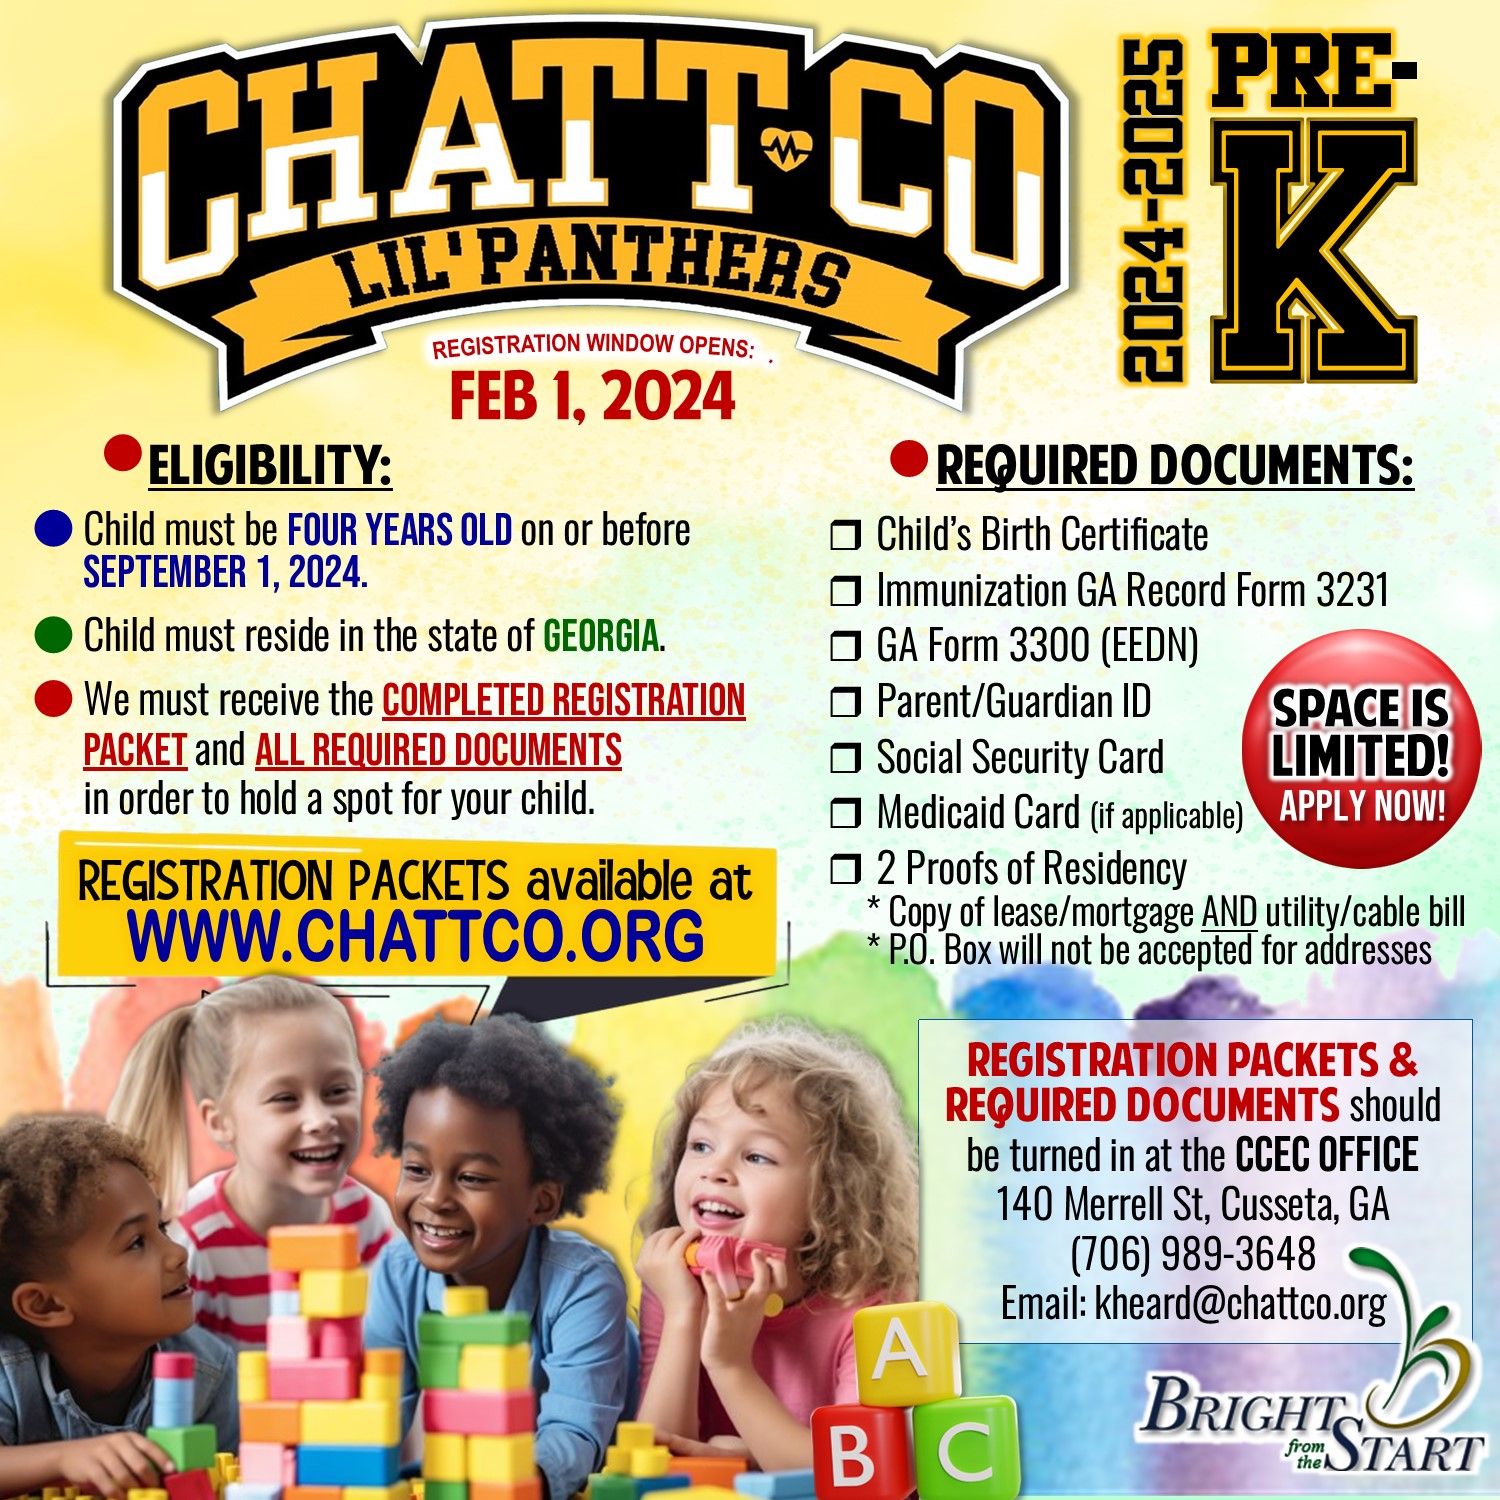 ChattCo PreK 24-25 Registration ELIGIBILITY:  r Child must be four years old on or          before September 1, 2024.  r Child must reside in the state of Georgia.  r We must receive the        completed registration packet and        ALL REQUIRED DOCUMENTS in order to hold a spot for your child. REQUIRED DOCUMENTS:  r Child’s Birth Certificate r Immunization GA Record Form 3231 r GA Form 3300 (EEDN) r Parent/Guardian ID r Social Security Card r Medicaid Card (if applicable) r 2 Proofs of Residency  Acceptable documents include: Current Lease, Property Tax Notice, Mortgage Statement,  Homeowner’s Insurance Bill AND Utility Bill, Electrical, Water, Gas or Cable statement listing the residence as the service address.    * P.O. Box will not be accepted for addresses   SPACE IS LIMITED REGISTRATION WINDOW OPENS FEB 1, 2024 REGISTRATION PACKETS & REQUIRED DOCUMENTS  should be turned in at the  chattahoochee county education center 140 Merrell St, Cusseta, GA (706) 989-3648